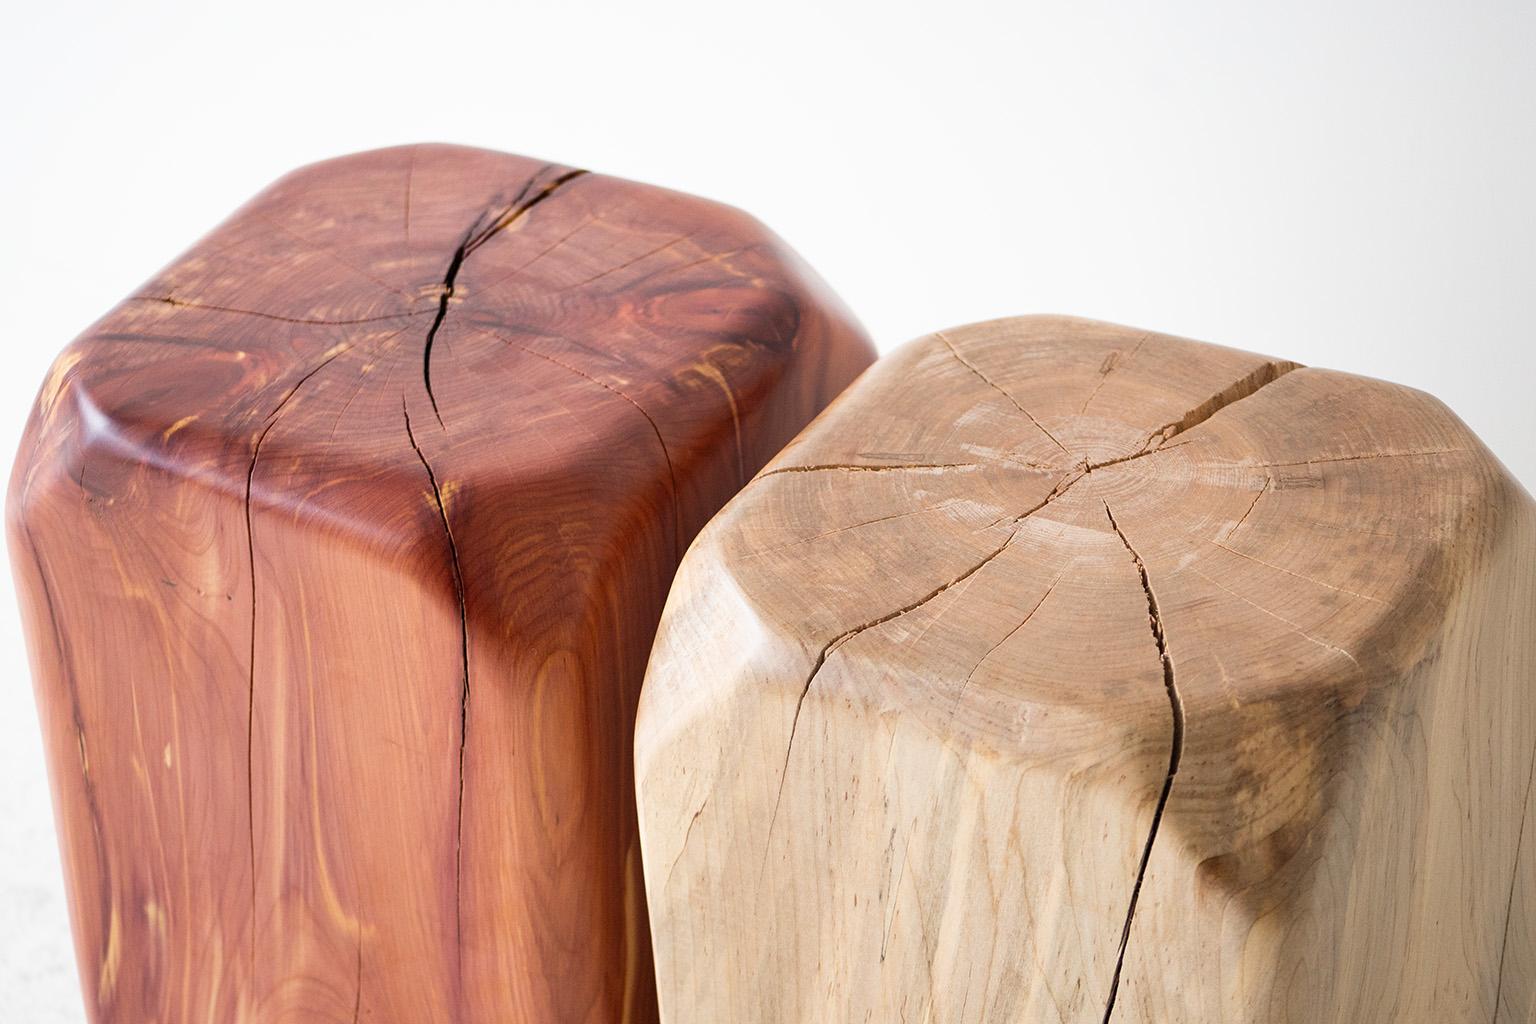 Contemporary Indoor Outdoor Wood Stool, The Dublin For Sale